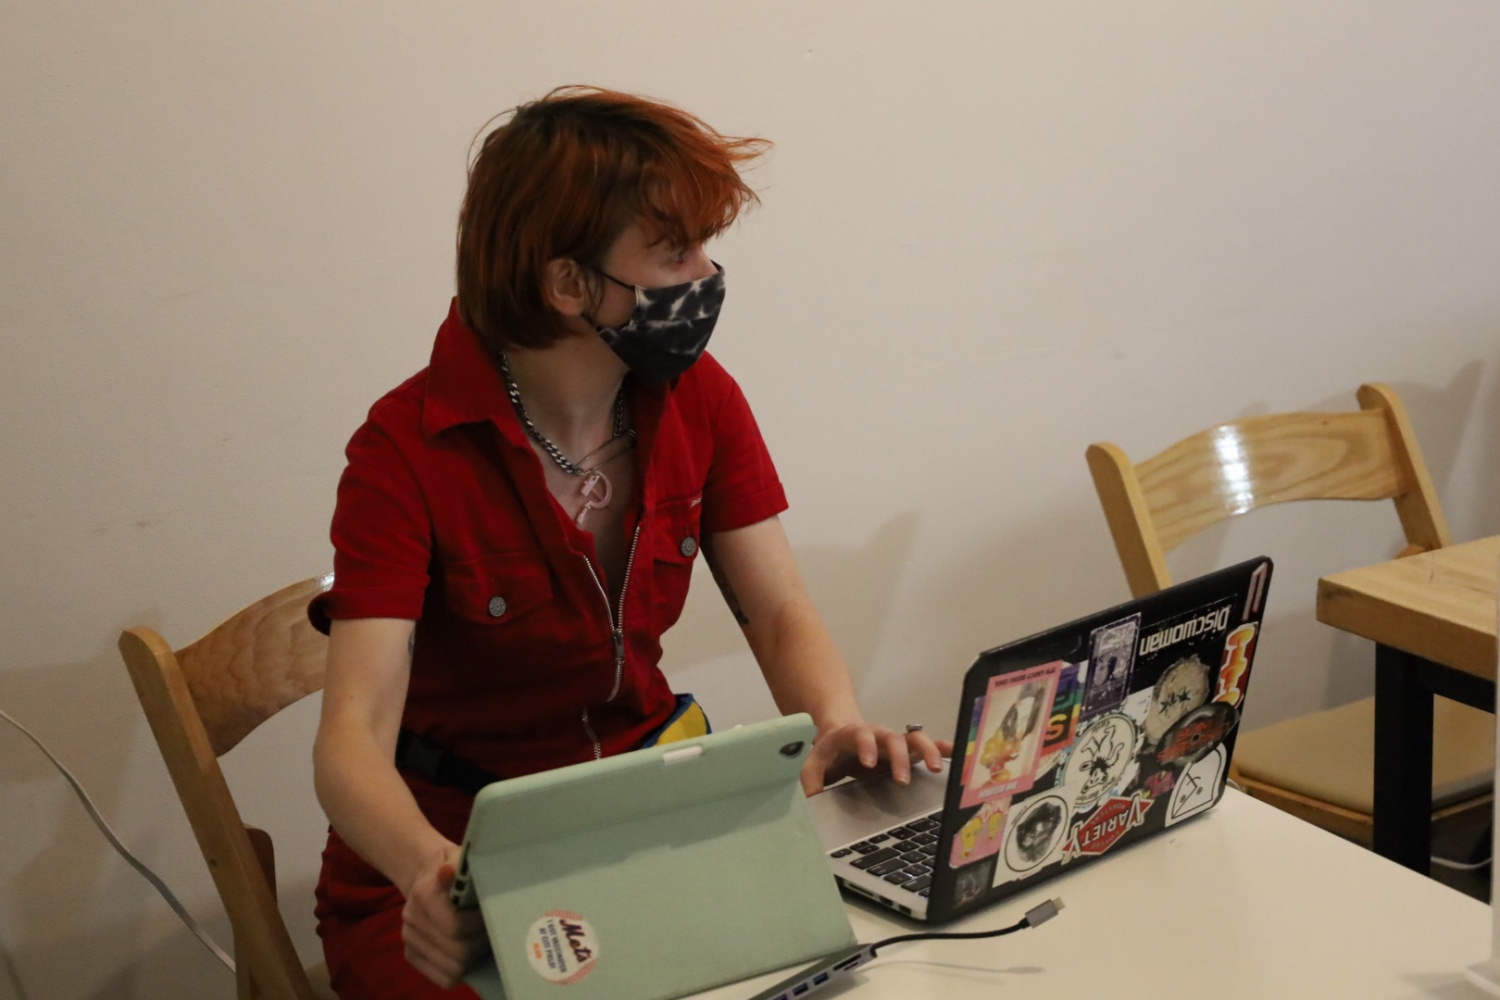 tee topor, who has short orange hair and bangs, wears a black and white tie-dye mask, red jumpsuit and a necklace adorned by a pink hammer and sickle pendant. They are sitting in front of a laptop covered by stickers and a tablet with a light green cover.